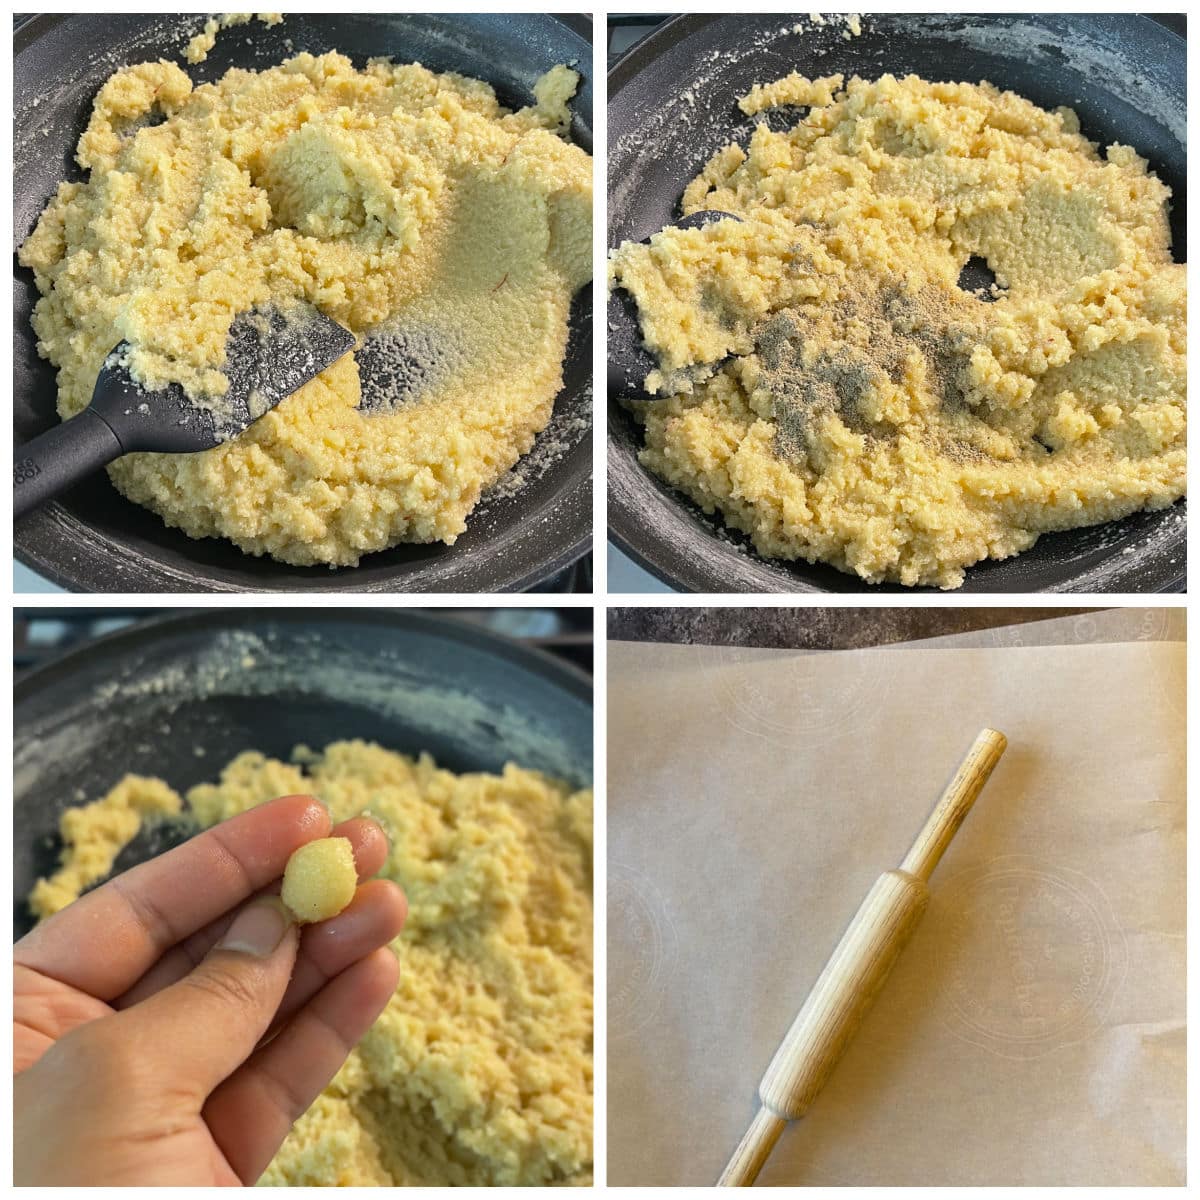 Mixing almond flour with cardamom